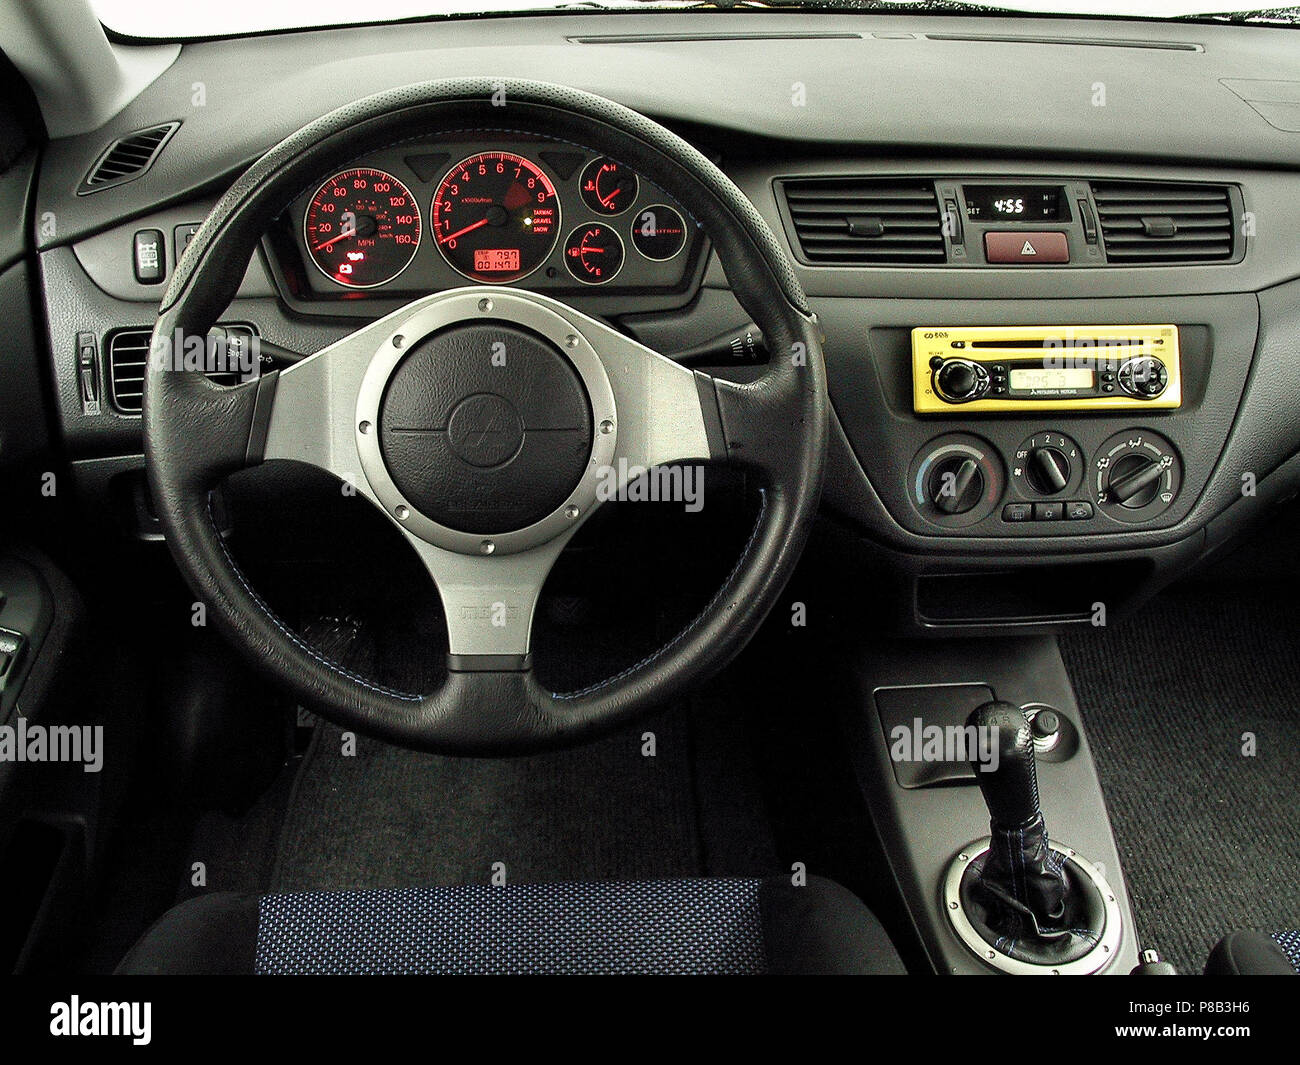 https://c8.alamy.com/comp/P8B3H6/mitsubishi-lancer-evolution-7-vii-evo-2002-model-in-lightening-yellow-colour-showing-drivers-seat-and-steering-wheel-and-dashboard-controls-P8B3H6.jpg